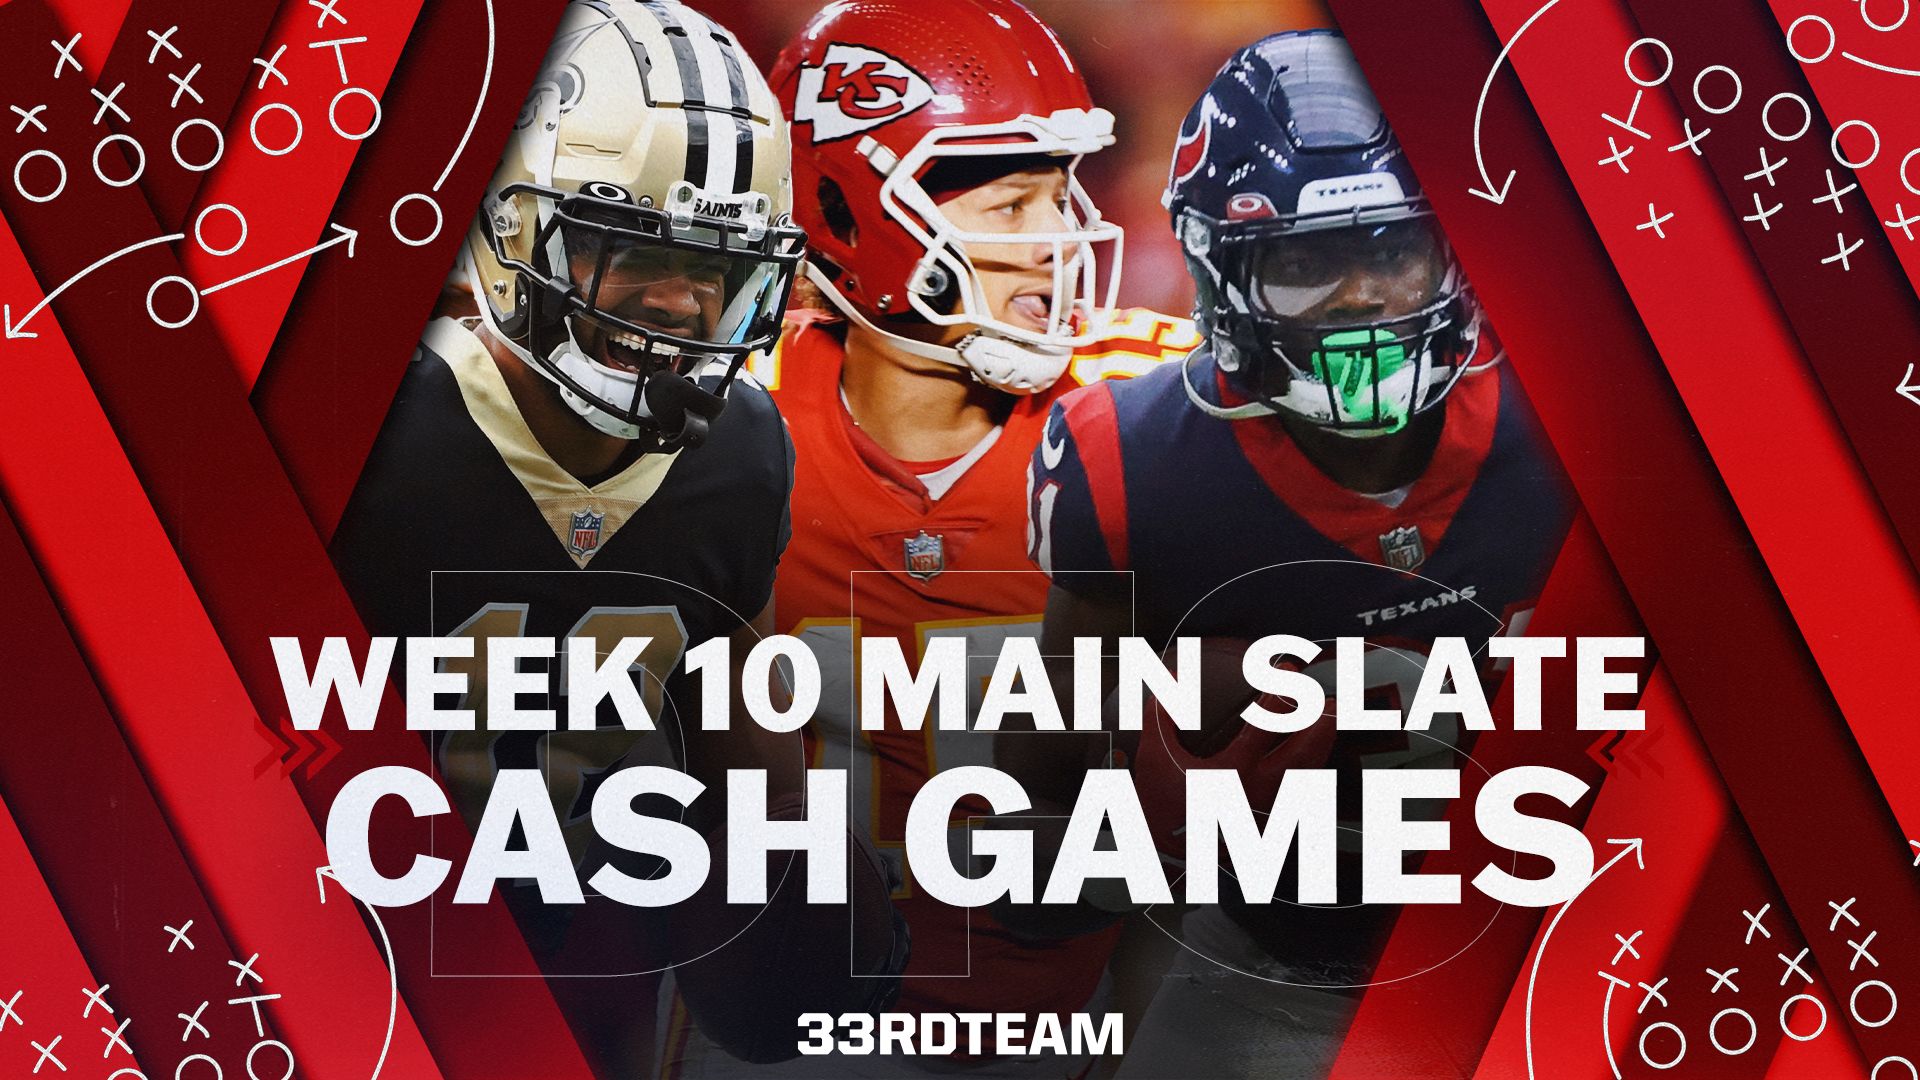 NFL DFS Cash Game Value Plays for Week 10 on FanDuel and DraftKings